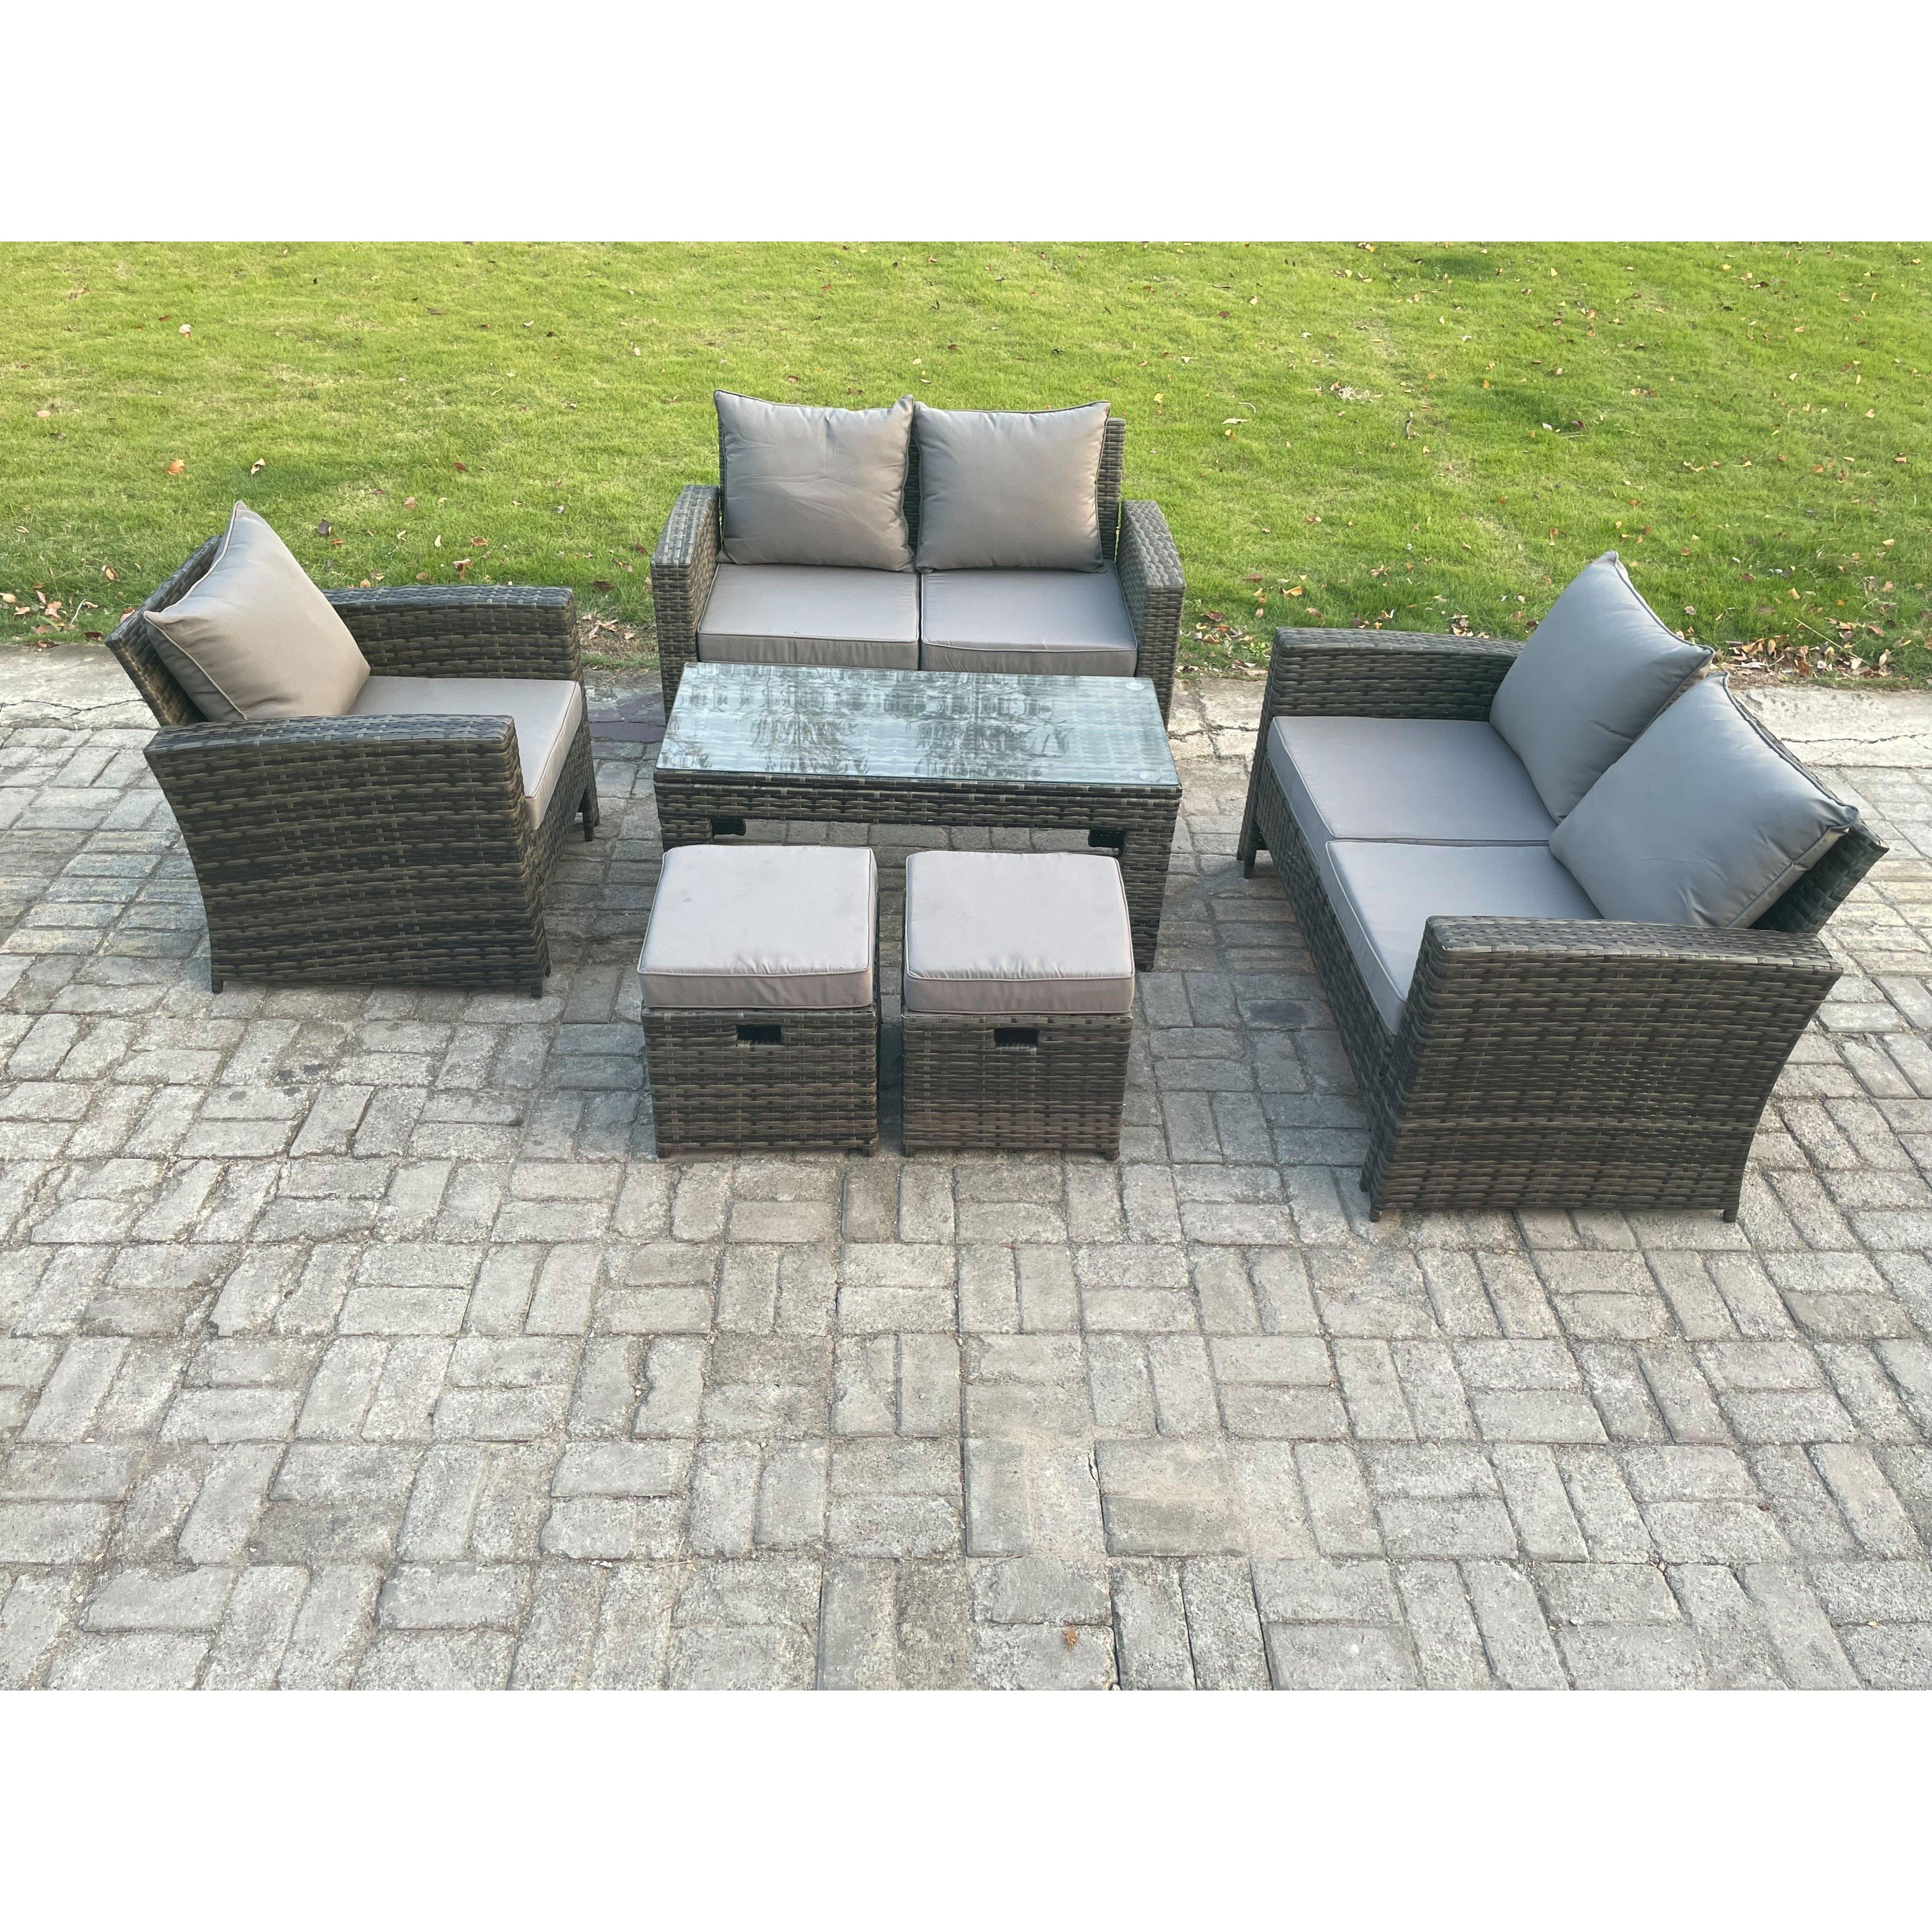 7 Seater Rattan Outdoor Garden Furniture Sofa Set with Coffee Table 2 Small Footstool Dark Grey Mixed - image 1